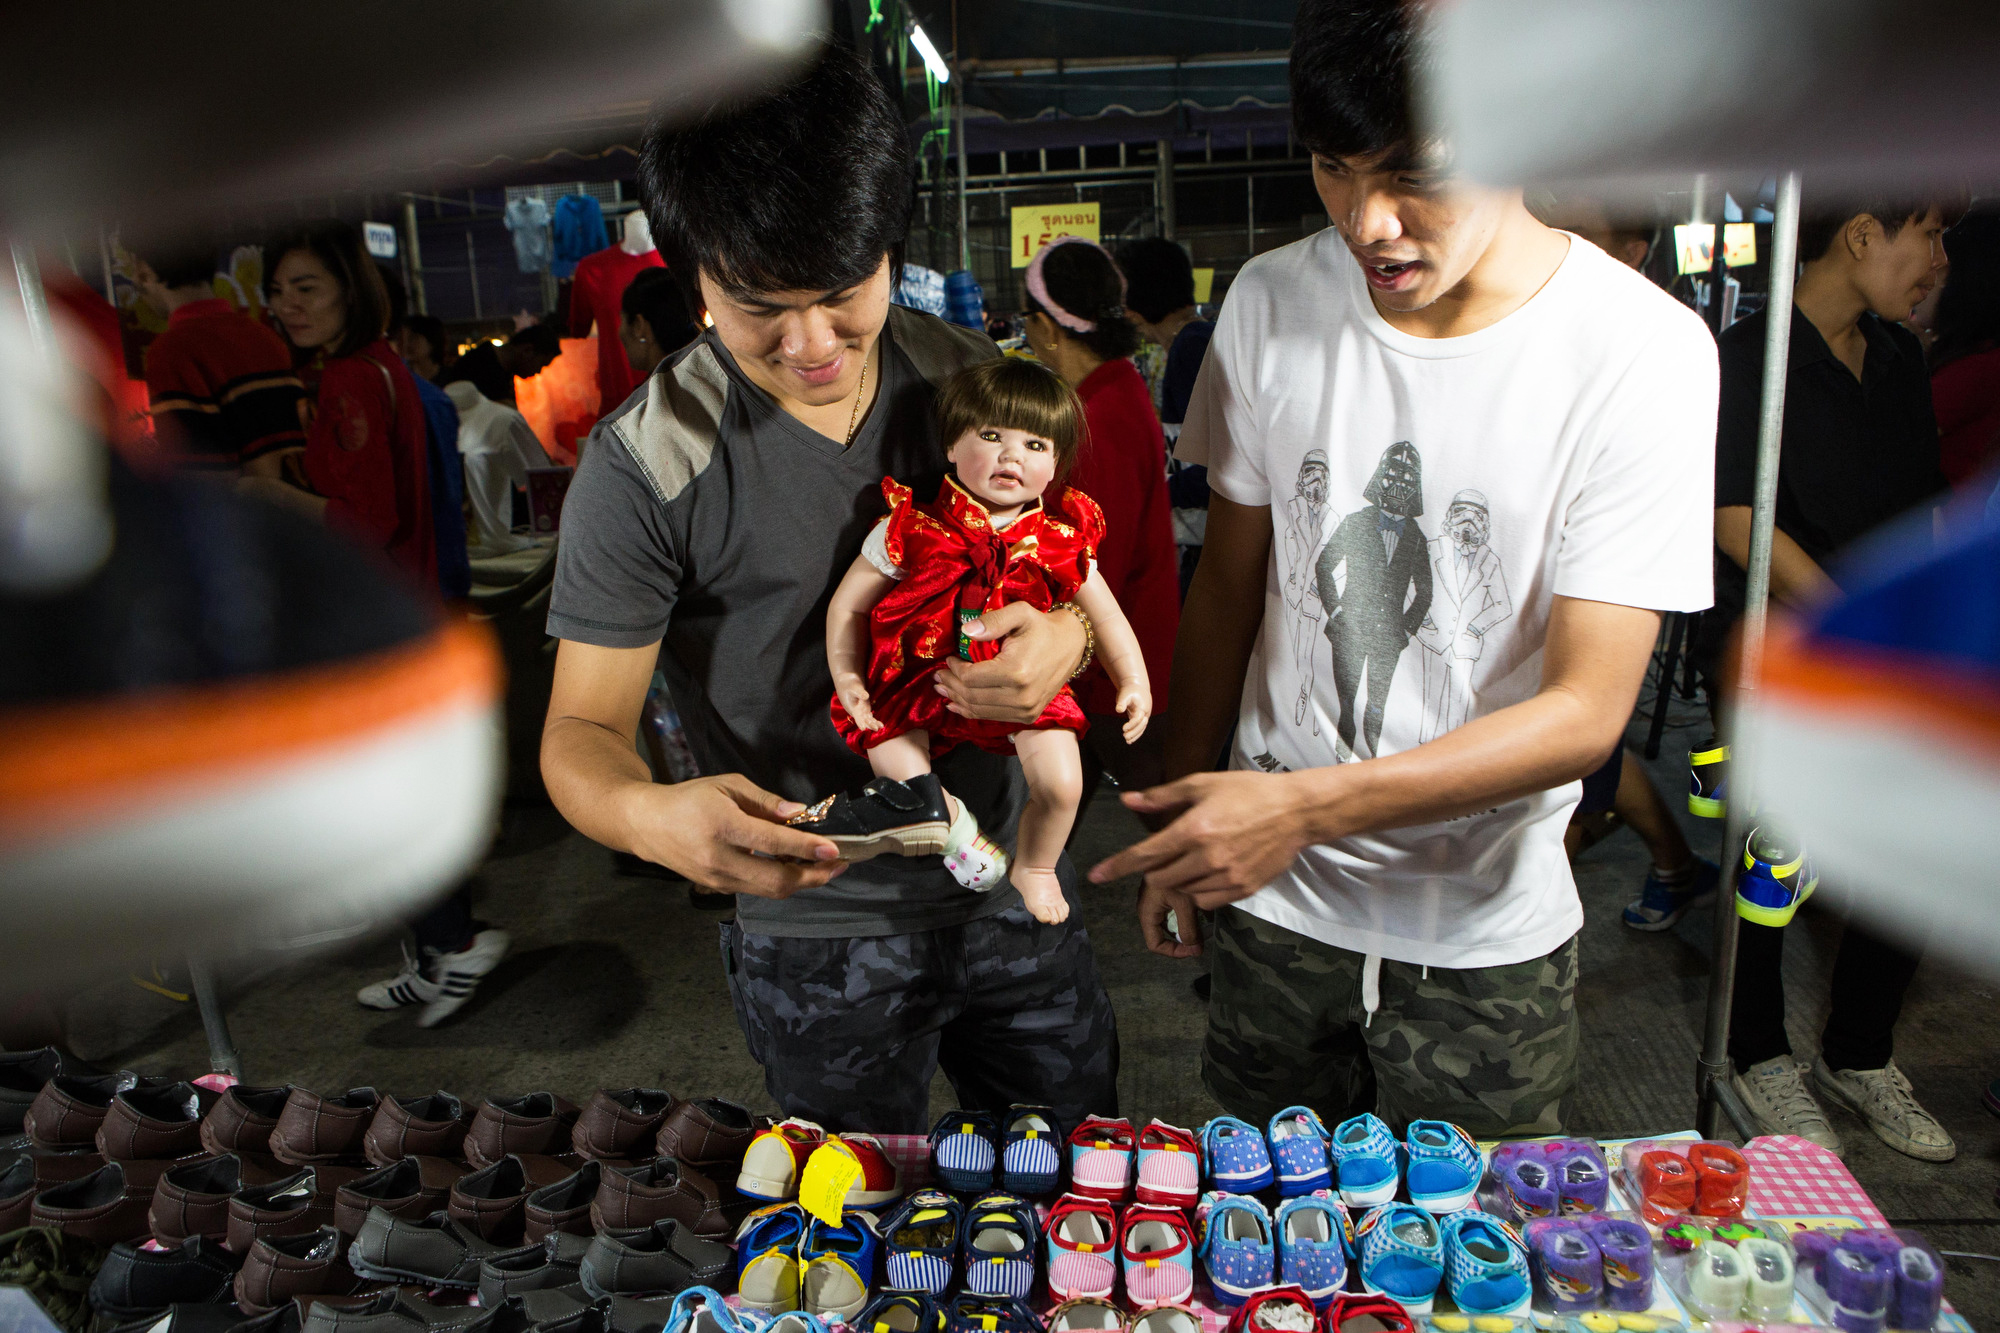 A couple shops for shoes for their Luk Thep doll at an outdoor market in Nakhon Sawan, Thailand on Feb. 10, 2016 .